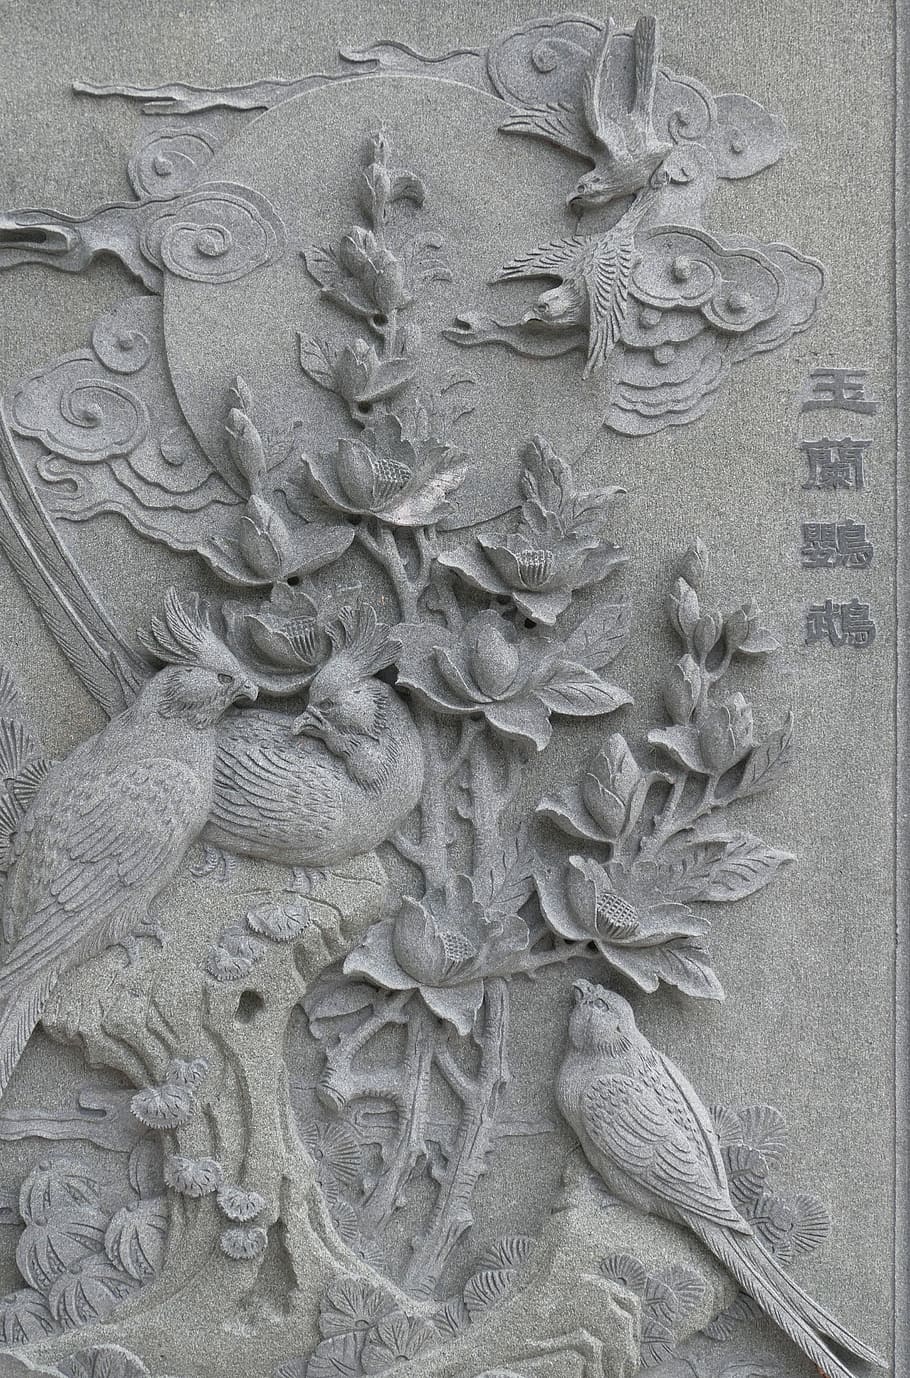 Taiwan, Image, Relief, Buddhism, China, taoism, temple, figure